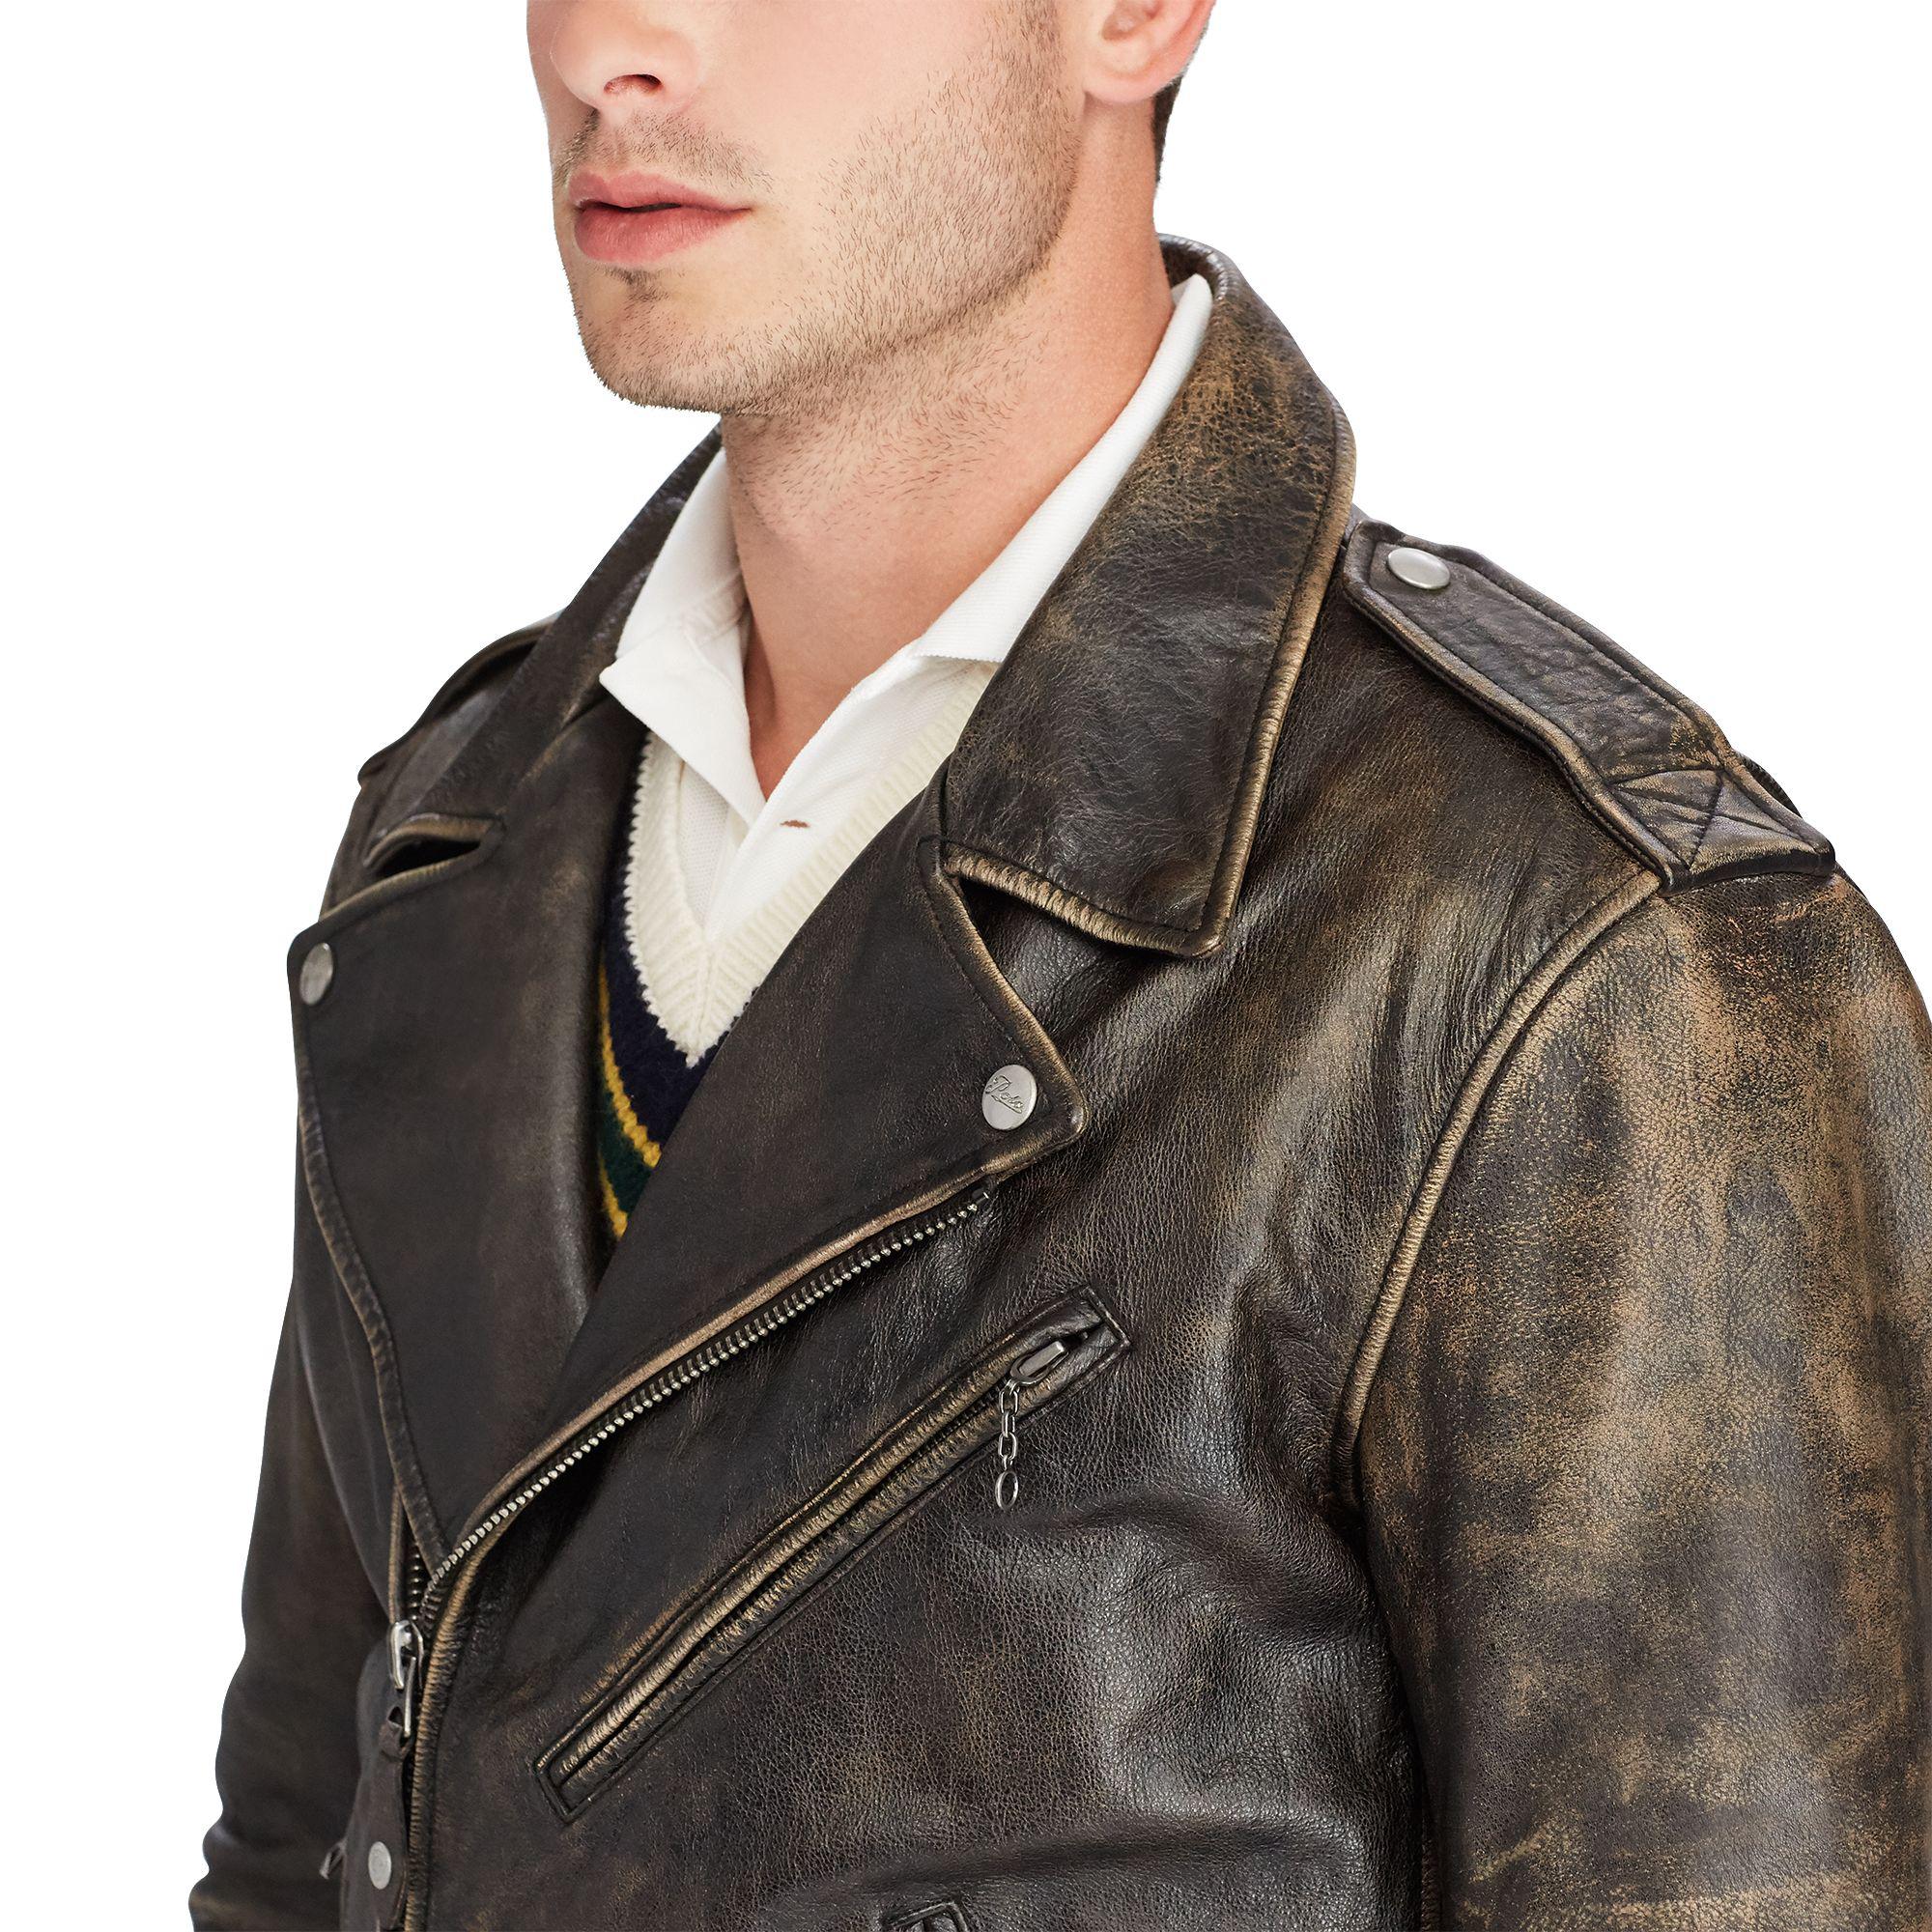 Polo Ralph Lauren The Iconic Motorcycle Jacket for Men | Lyst